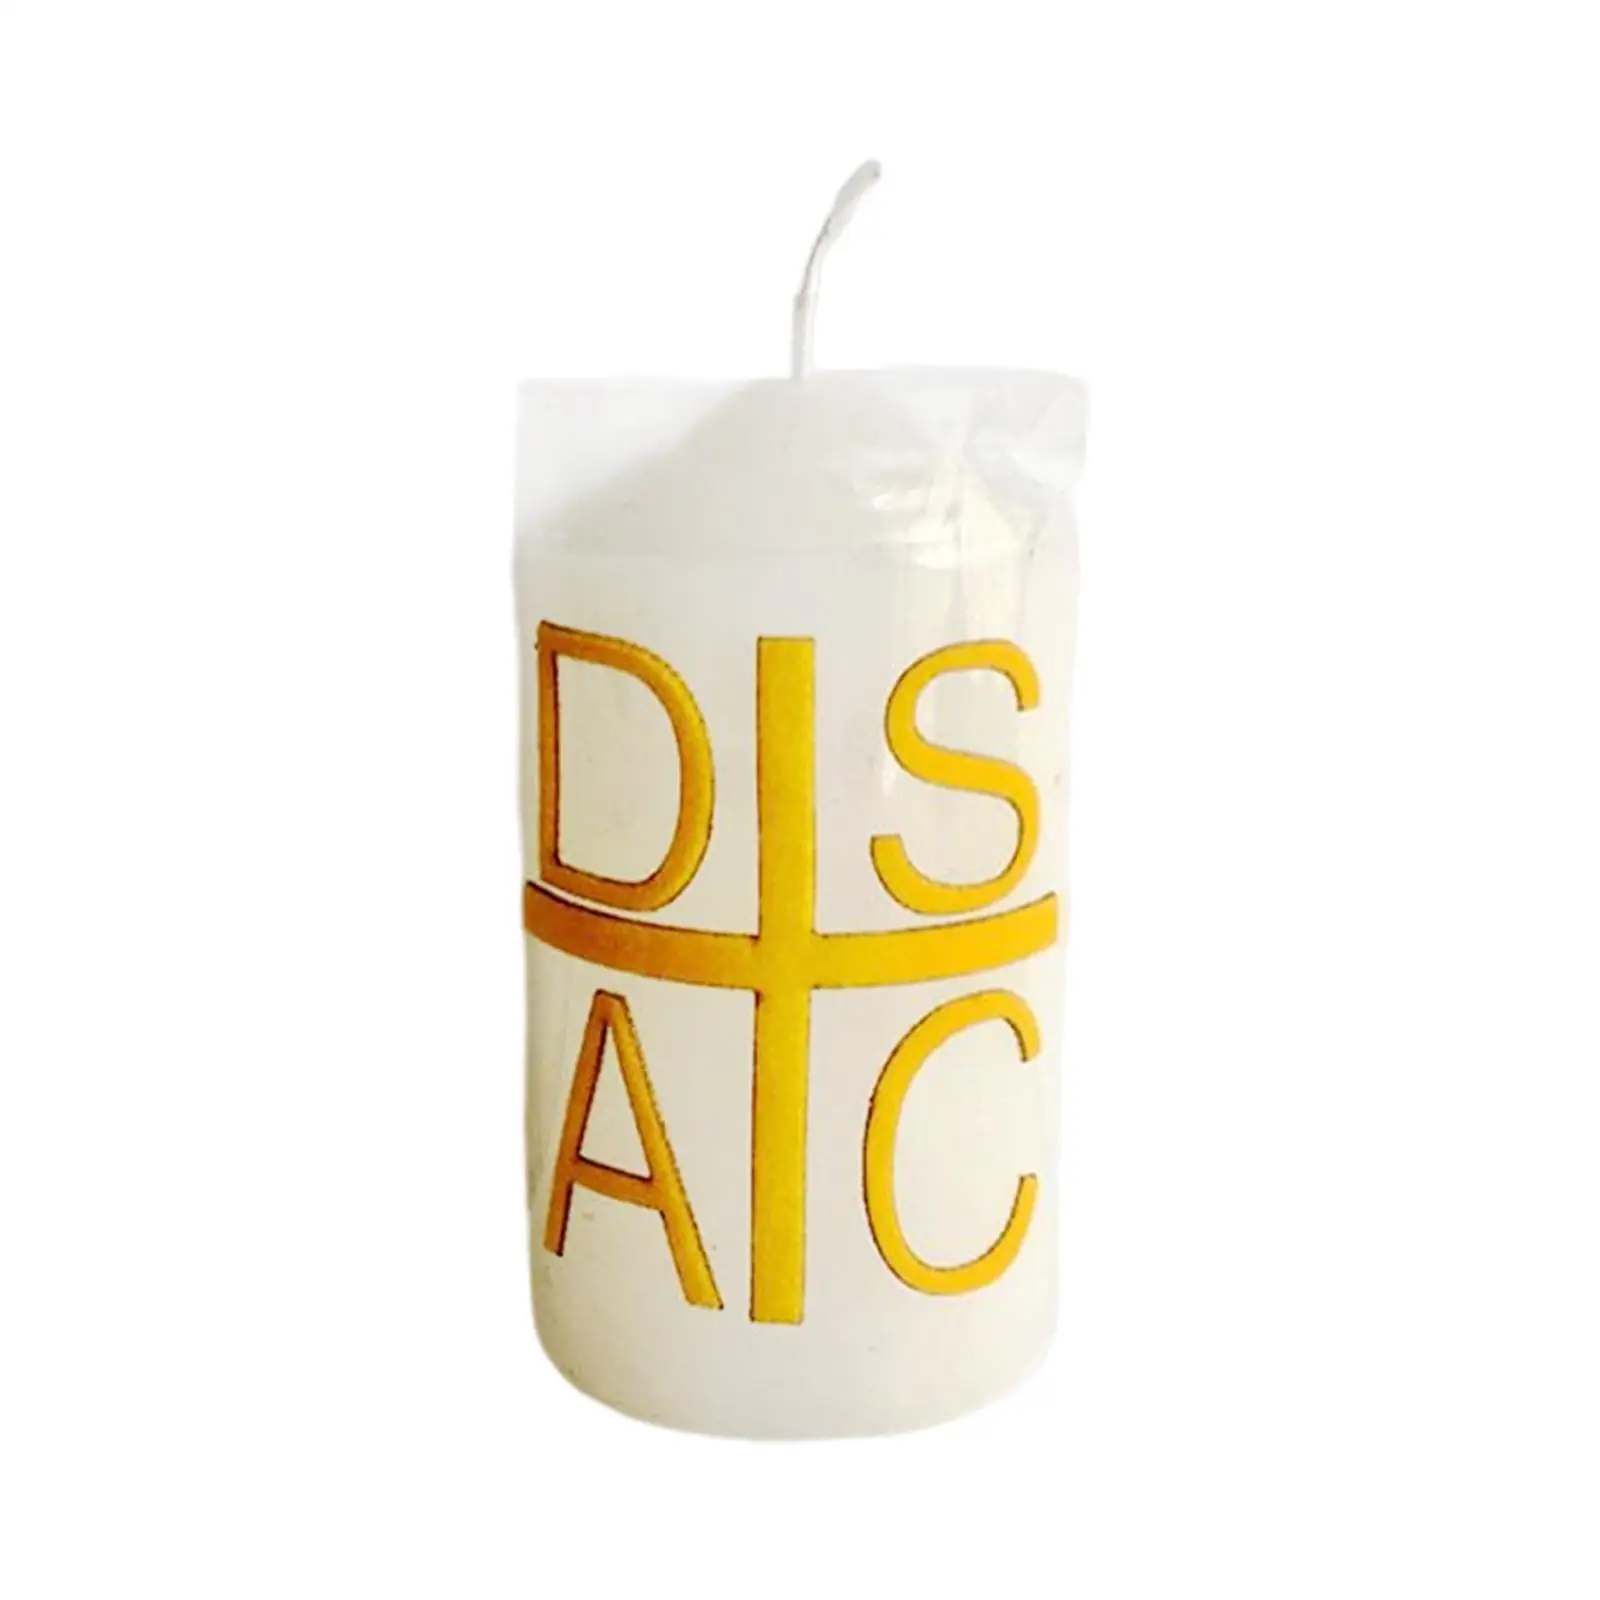 Catholic Candle Christian Festivals Candle Decorative Religious Candle Churches Candle for Living Room Party Table Home Decor